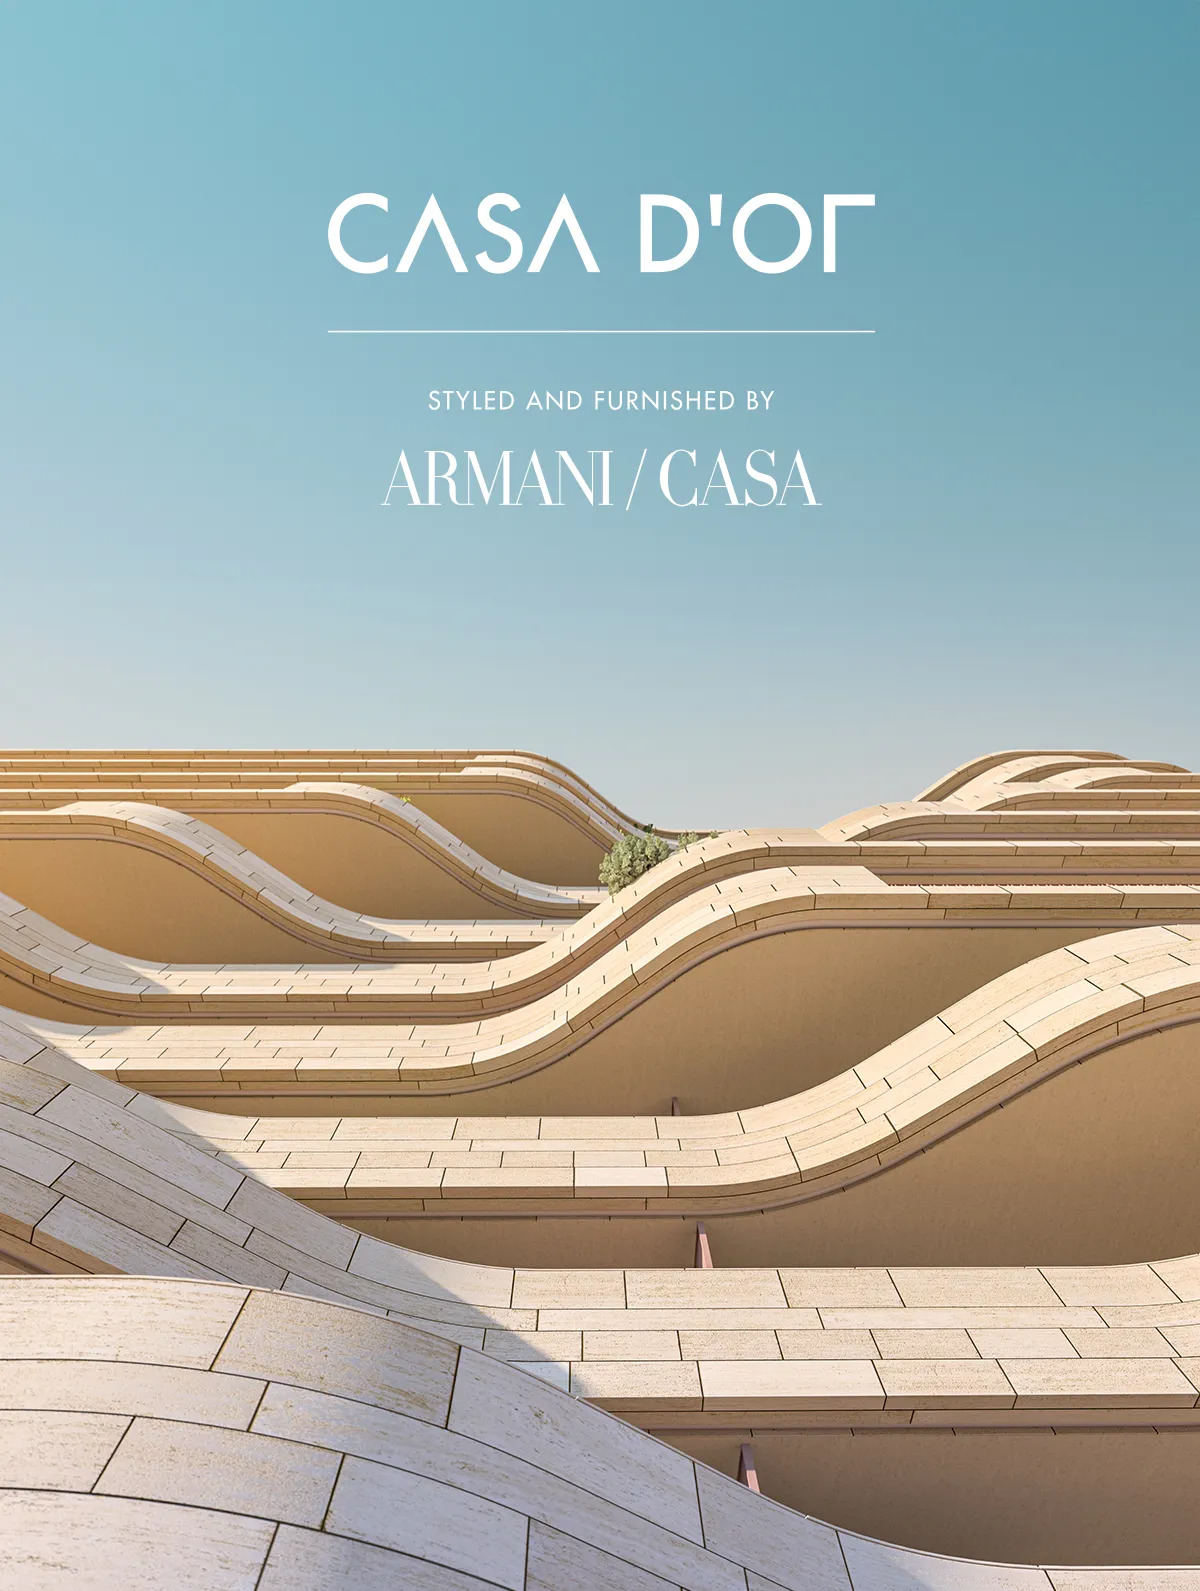 Casa d'Or - More than home, Casa d’Or is a personal statement. - By HDG